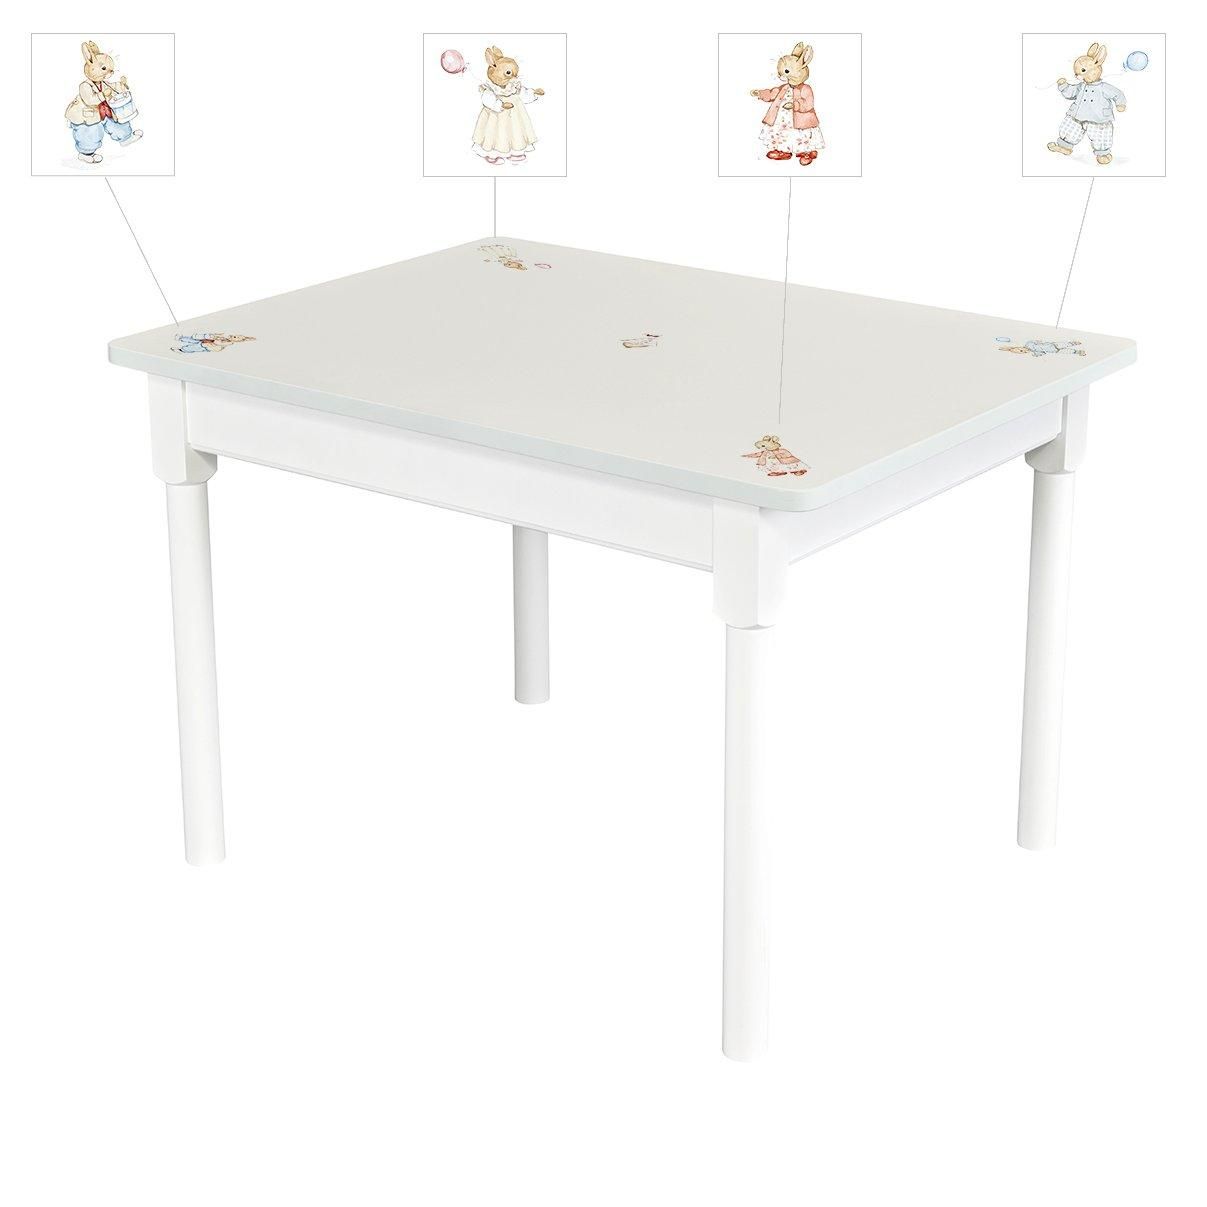 Play Table - Designer Bunnies with Chic Grey Trim